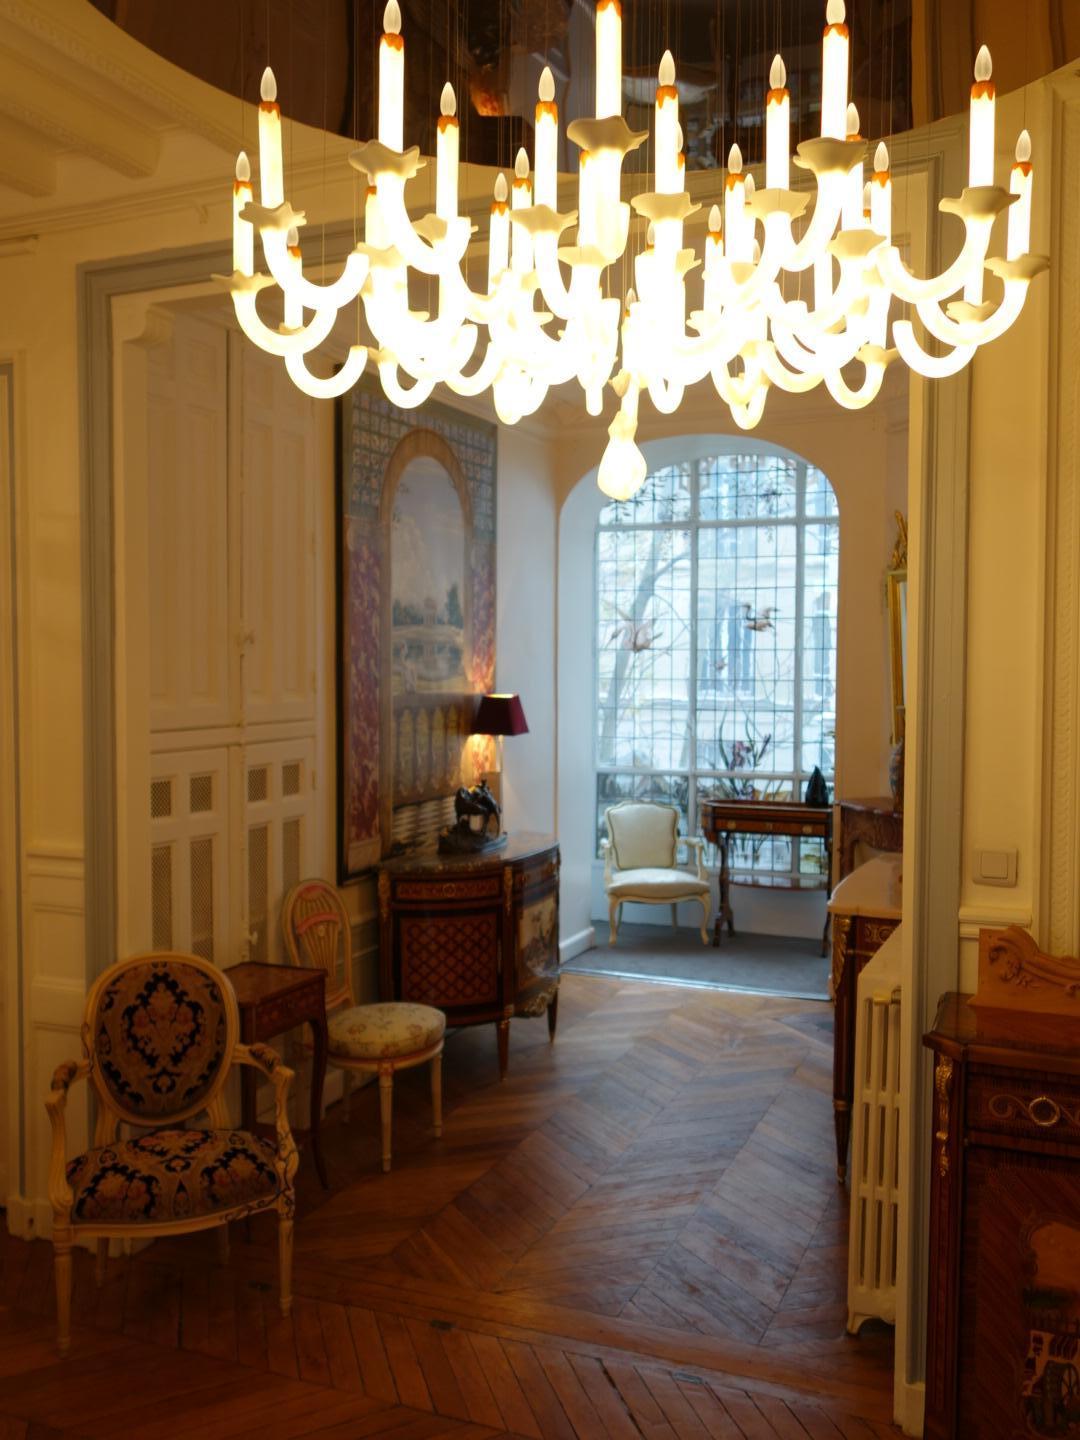 The Wersailles Fleur bespoke chandelier is designed by Sylvie Maréchal and it is entirely manufactured in France. This chandelier is made of 40 Limoges porcelain white candleholders and 1 Limoges porcelain white dangling drop. The candleholders and